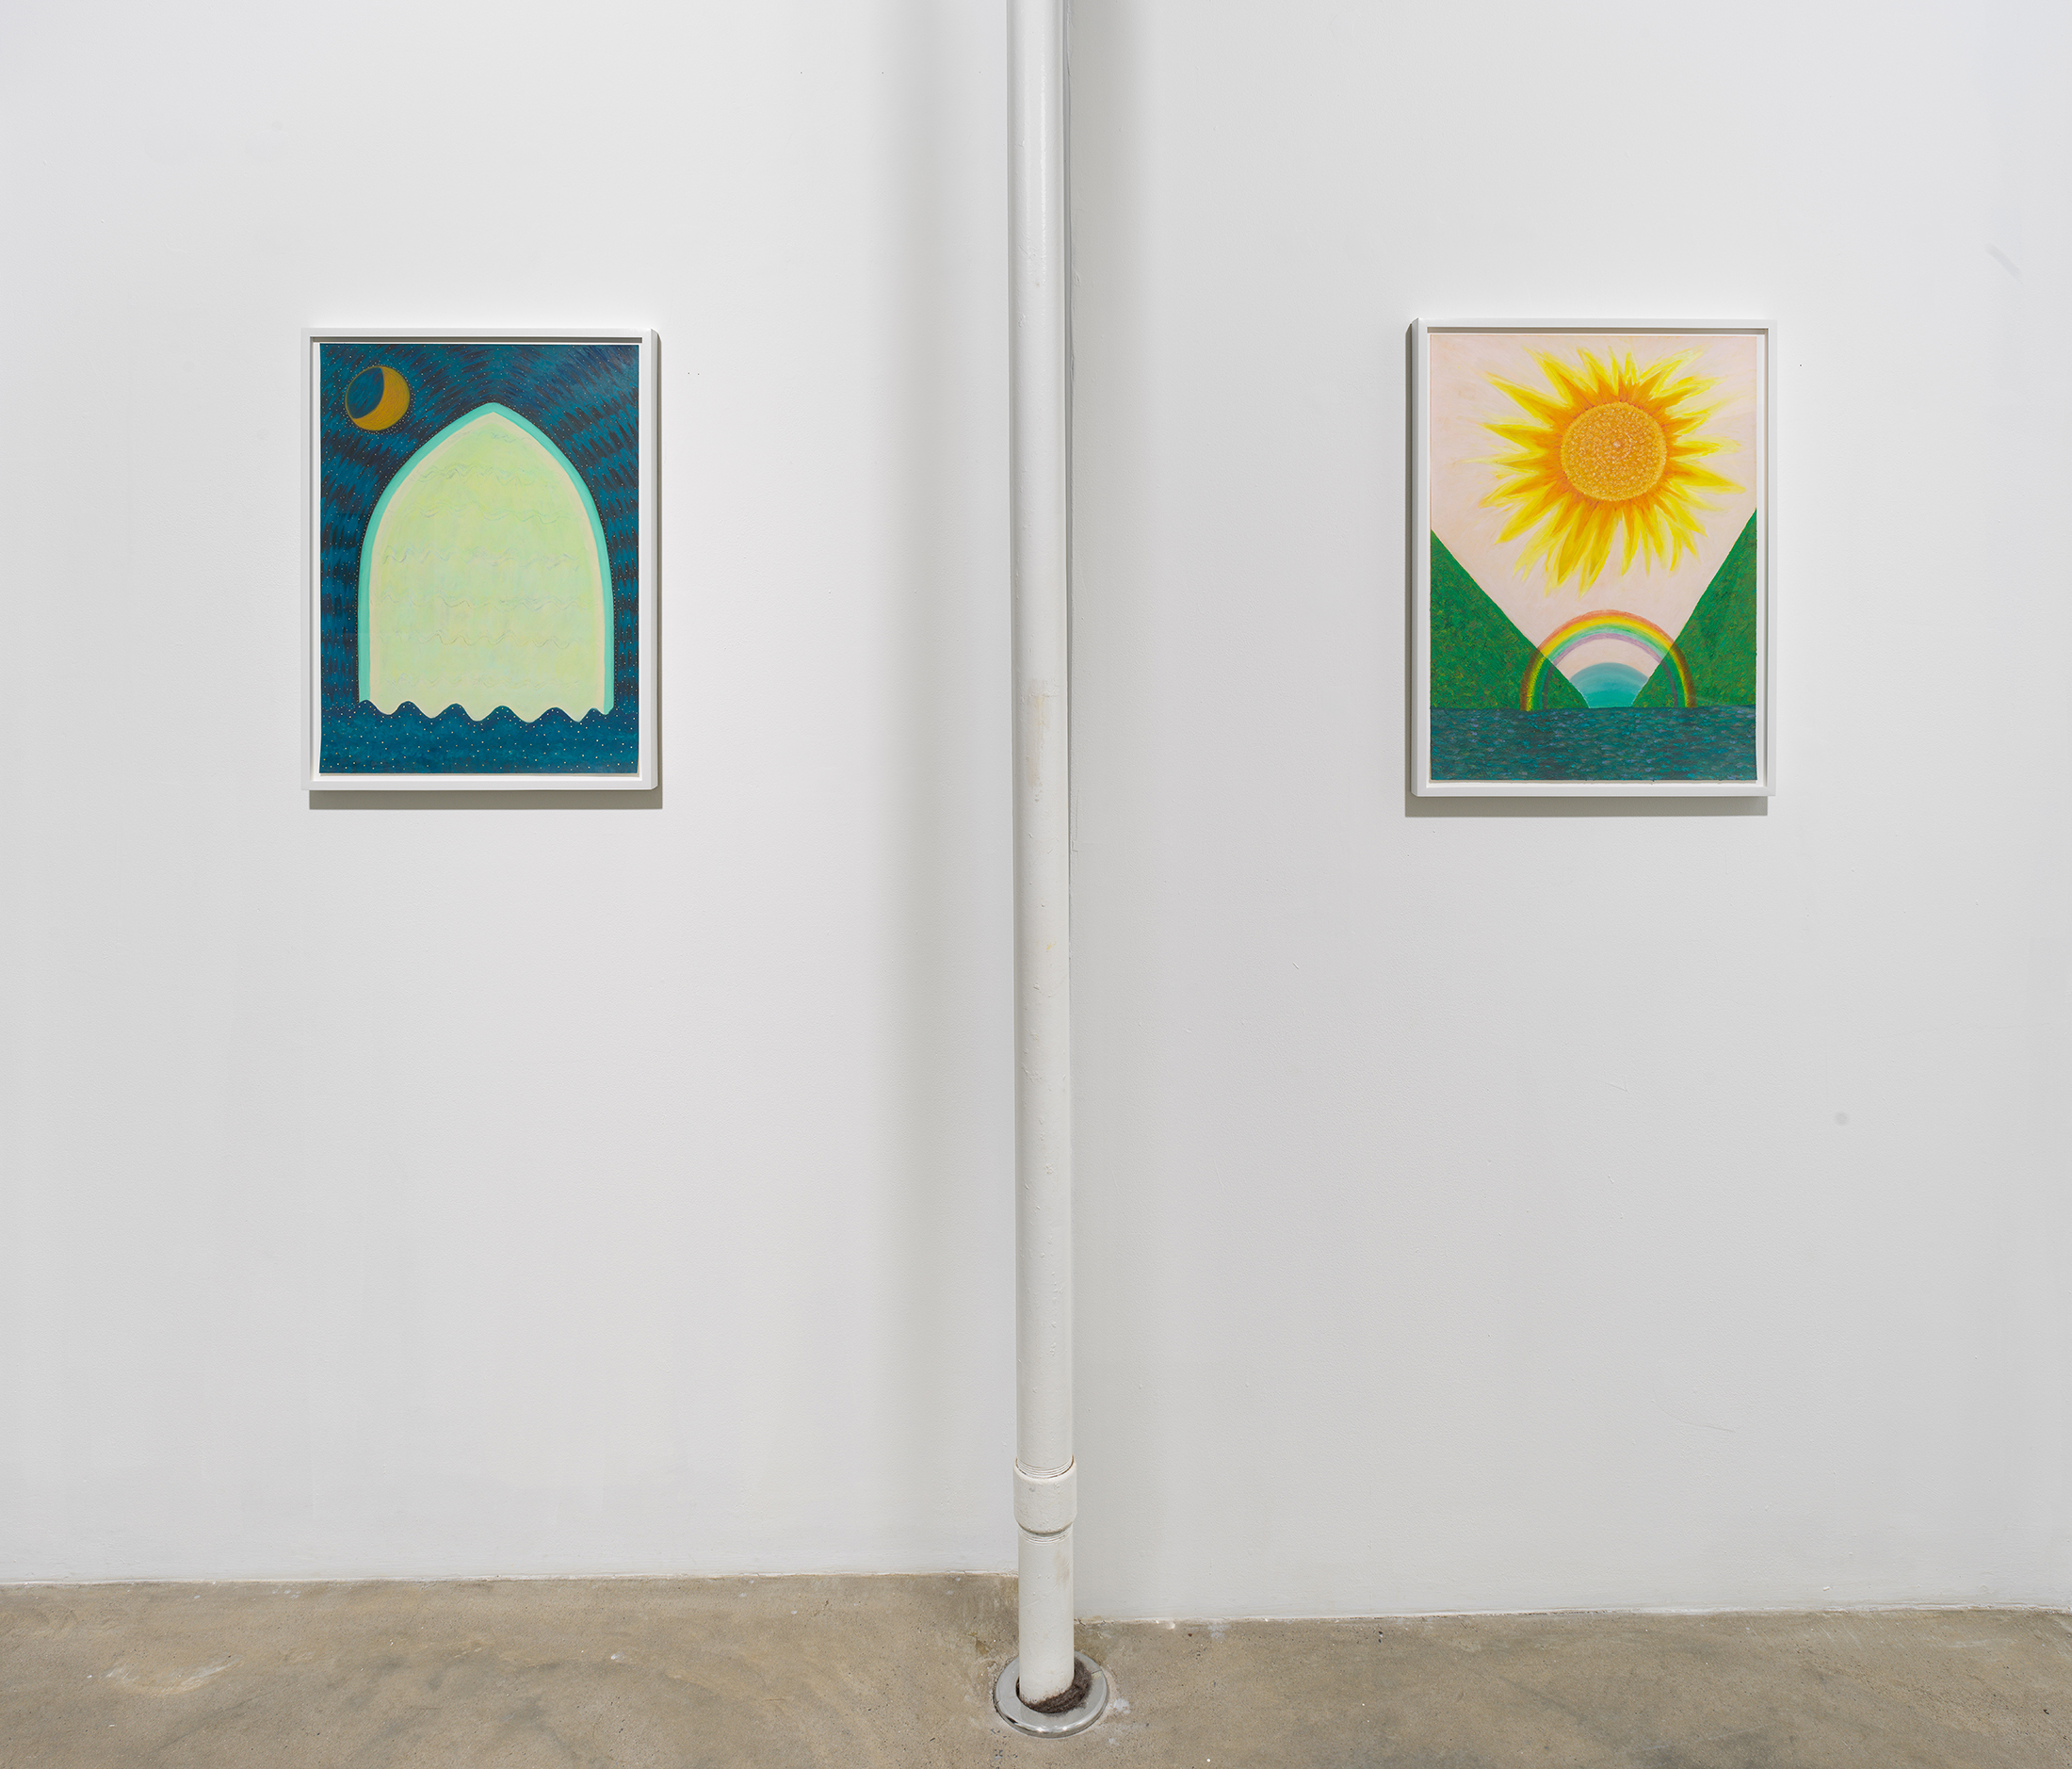 Ping Zheng, Installation view showing two framed works on paper: 'In the Blue Light' and 'Sun + Flower'